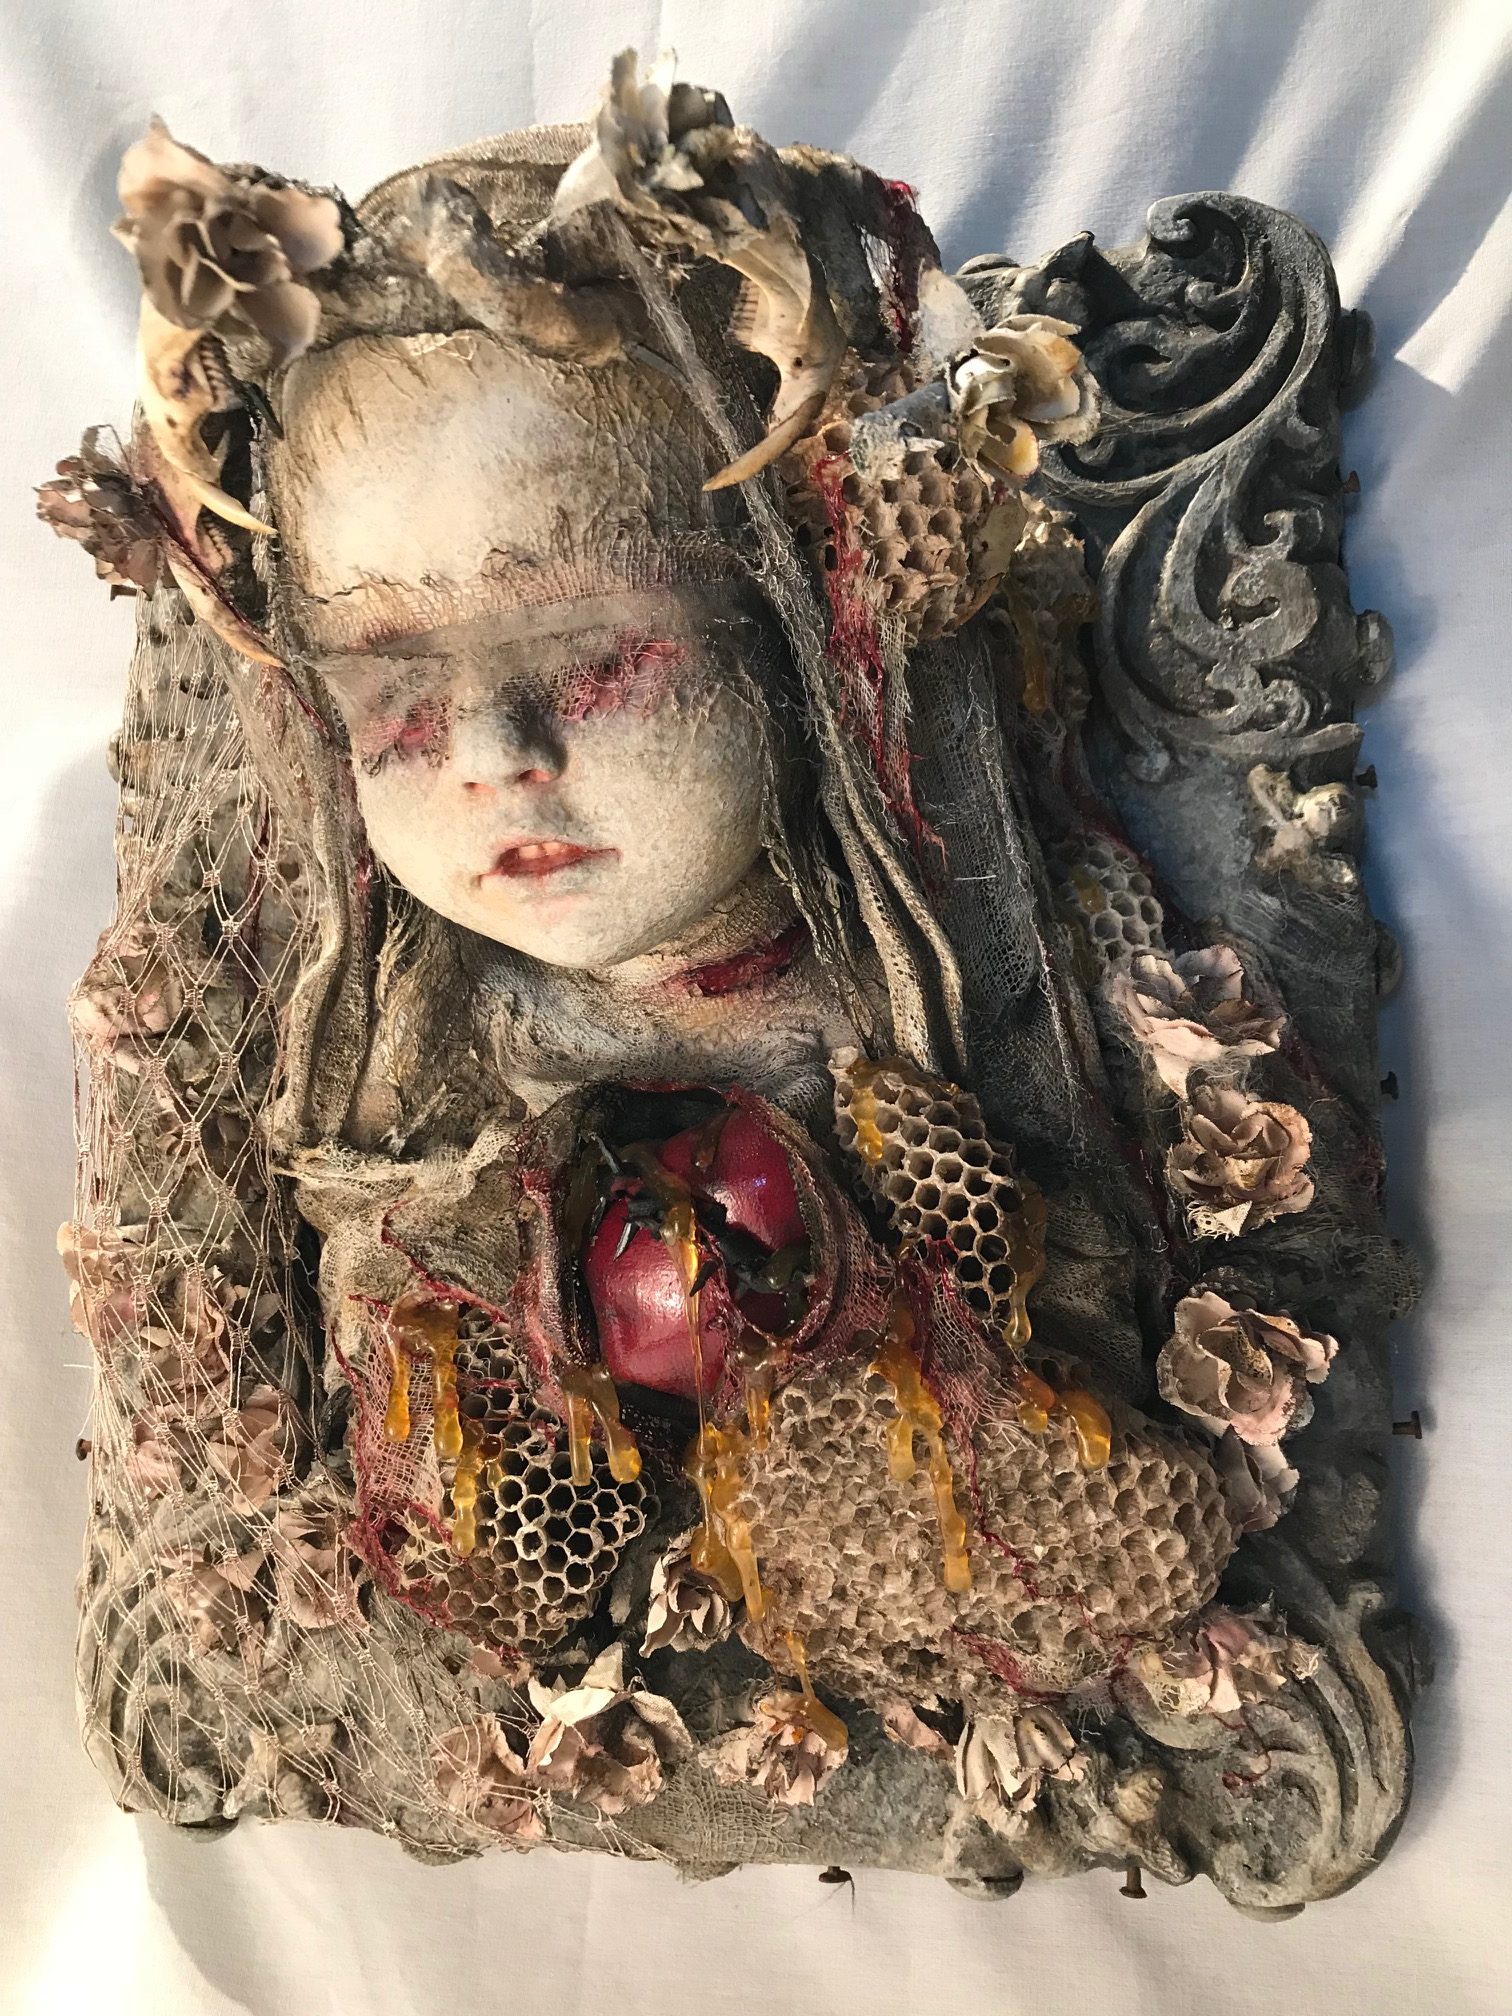 mixed media assemblage plaque blindfolded painted porcelain doll with bone and honeycomb